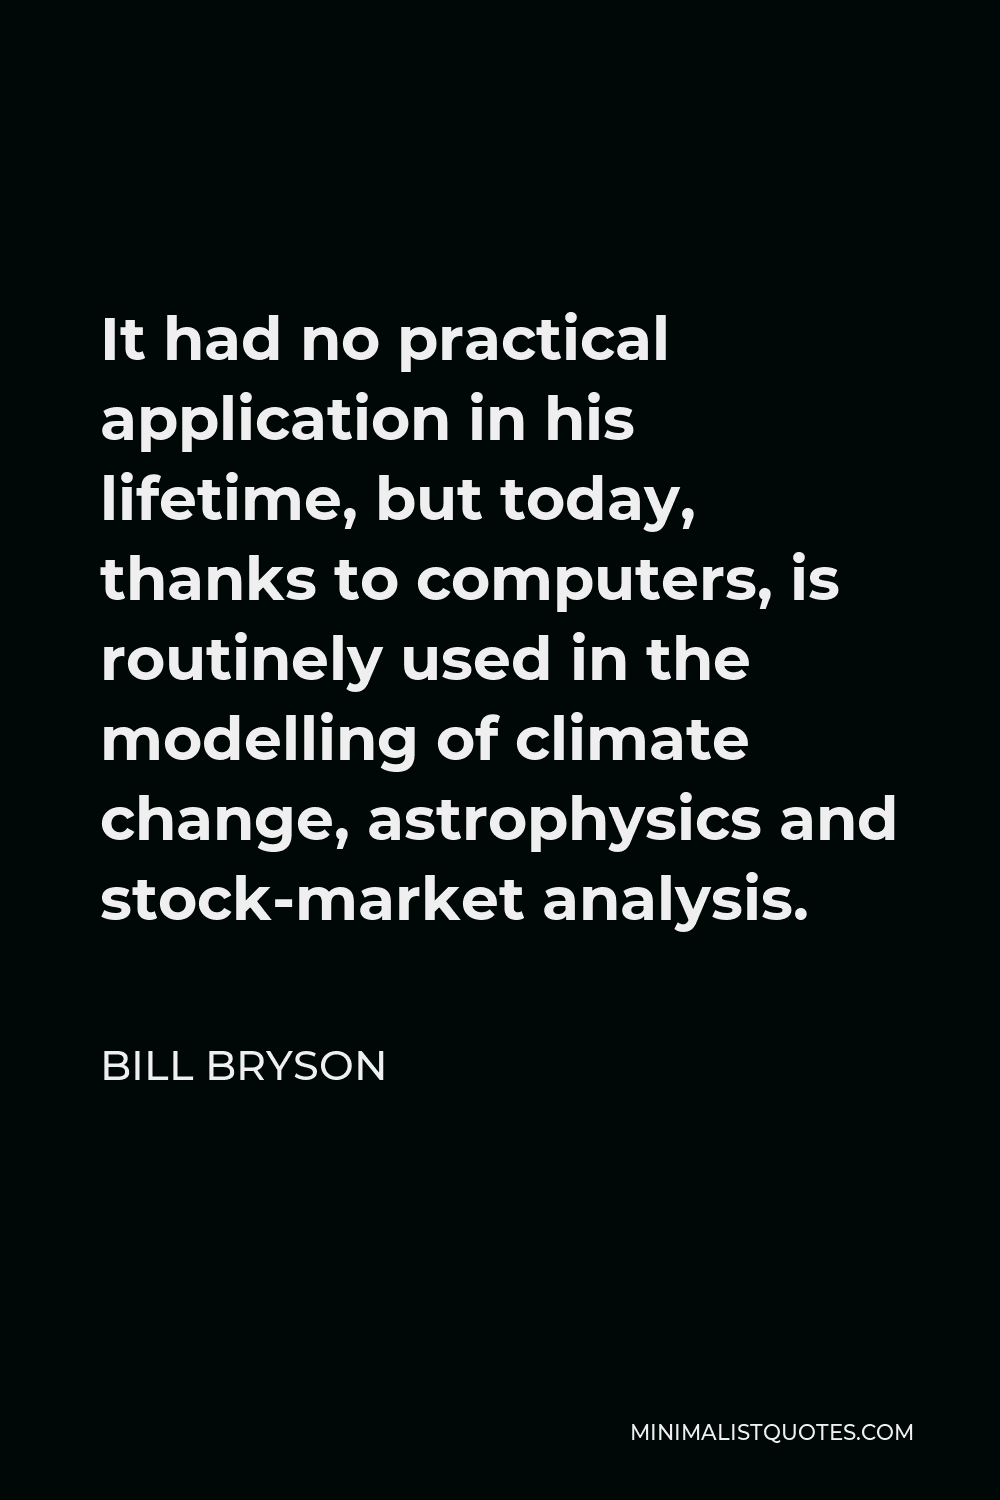 Bill Bryson Quote - It had no practical application in his lifetime, but today, thanks to computers, is routinely used in the modelling of climate change, astrophysics and stock-market analysis.